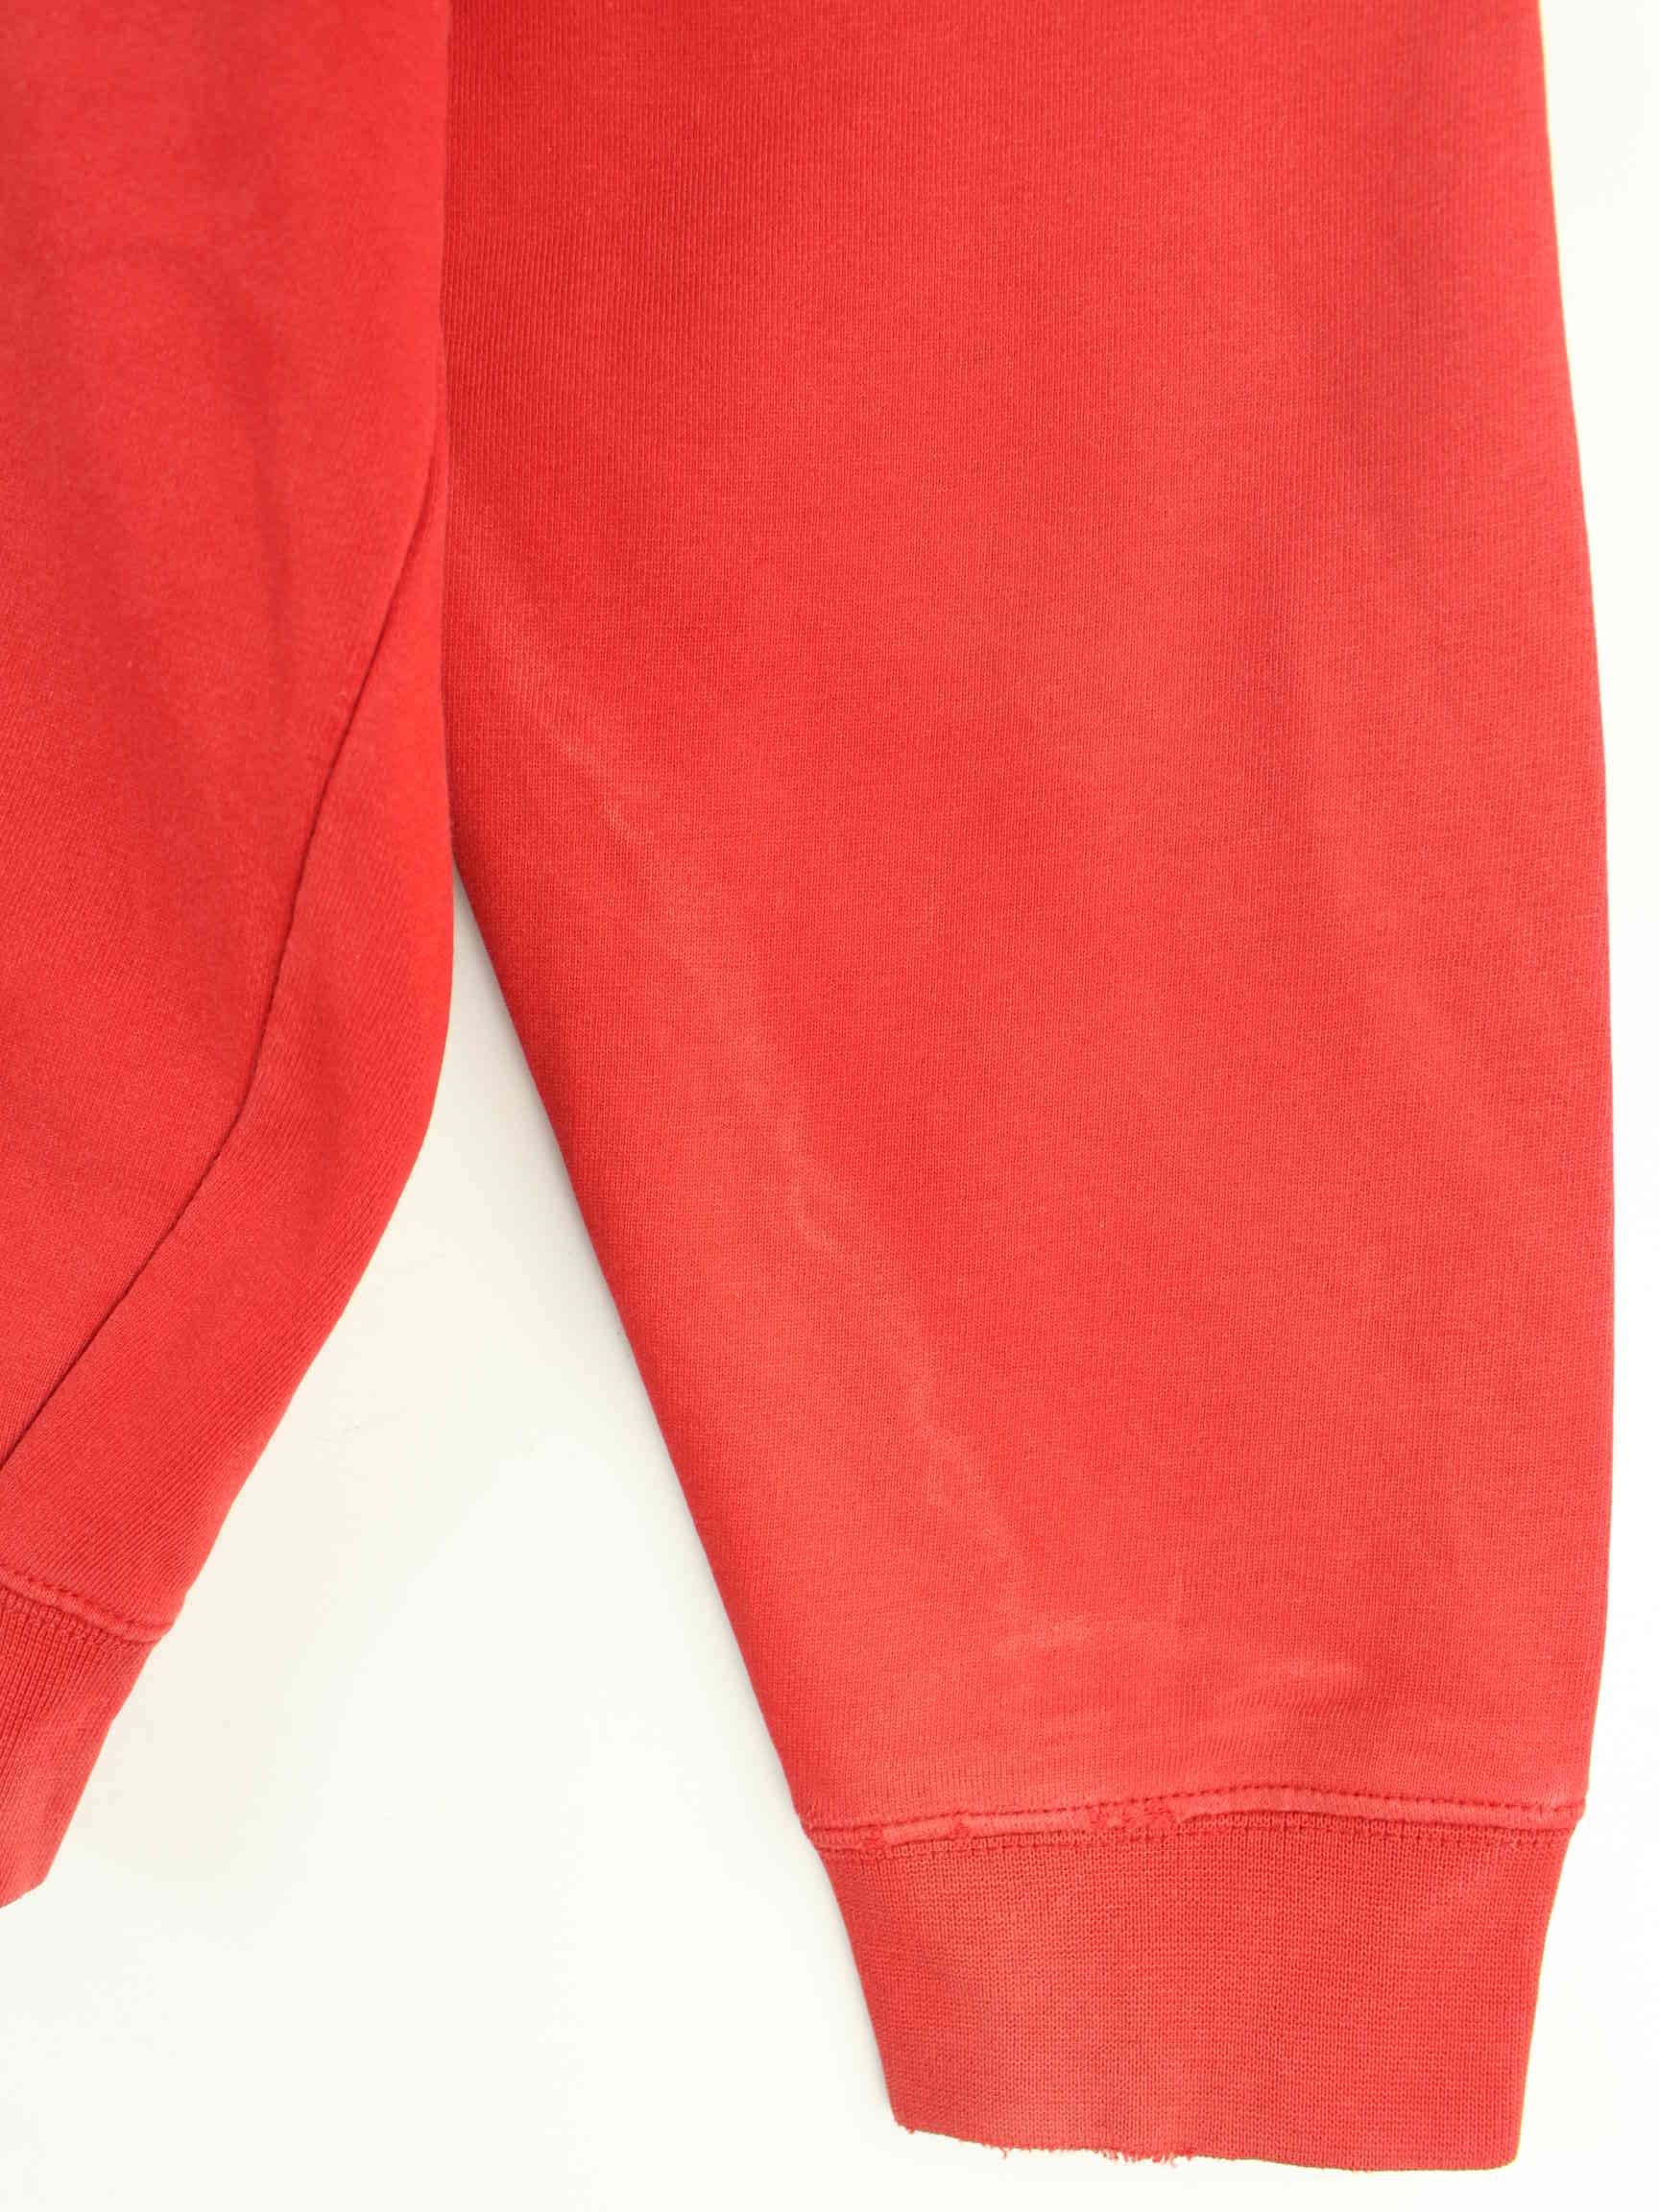 Fila Embroidered Sweater Rot L (detail image 2)